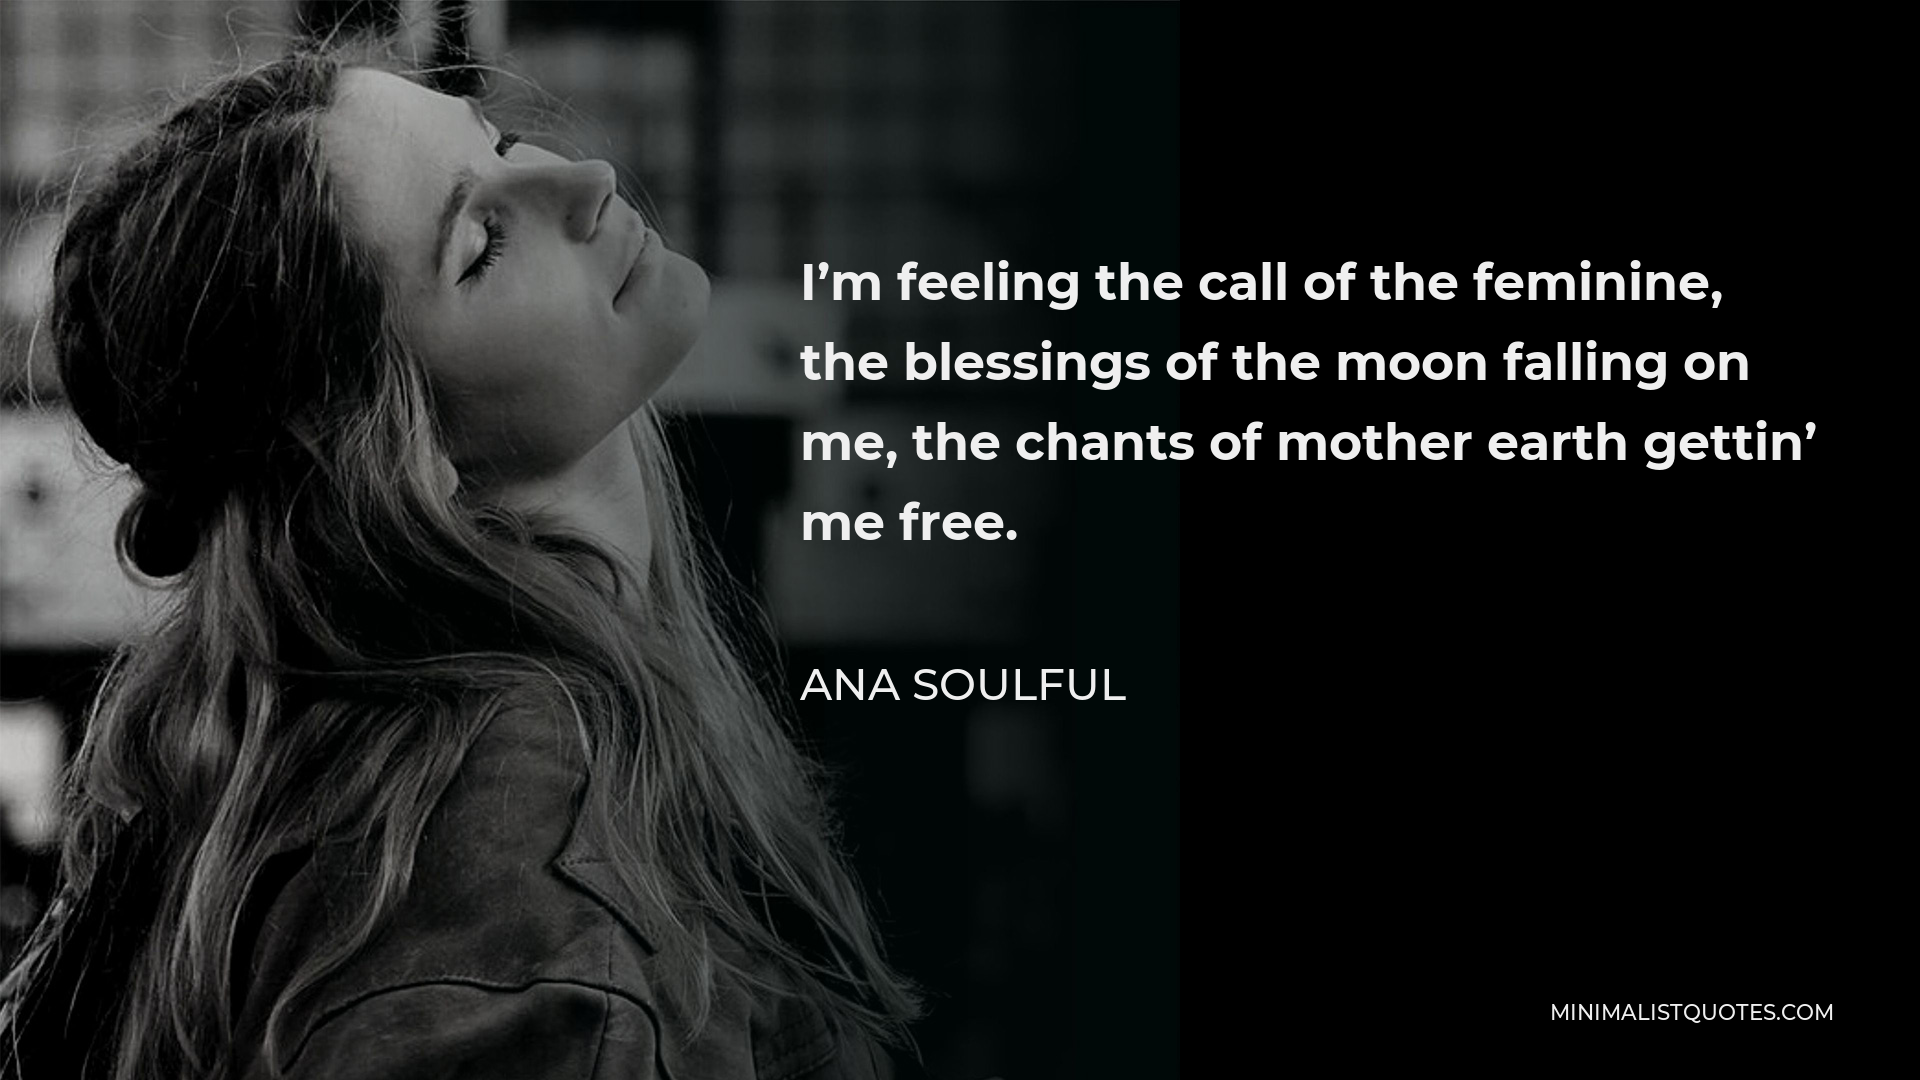 Ana Soulful Quote - I’m feeling the call of the feminine, the blessings of the moon falling on me, the chants of mother earth gettin’ me free.